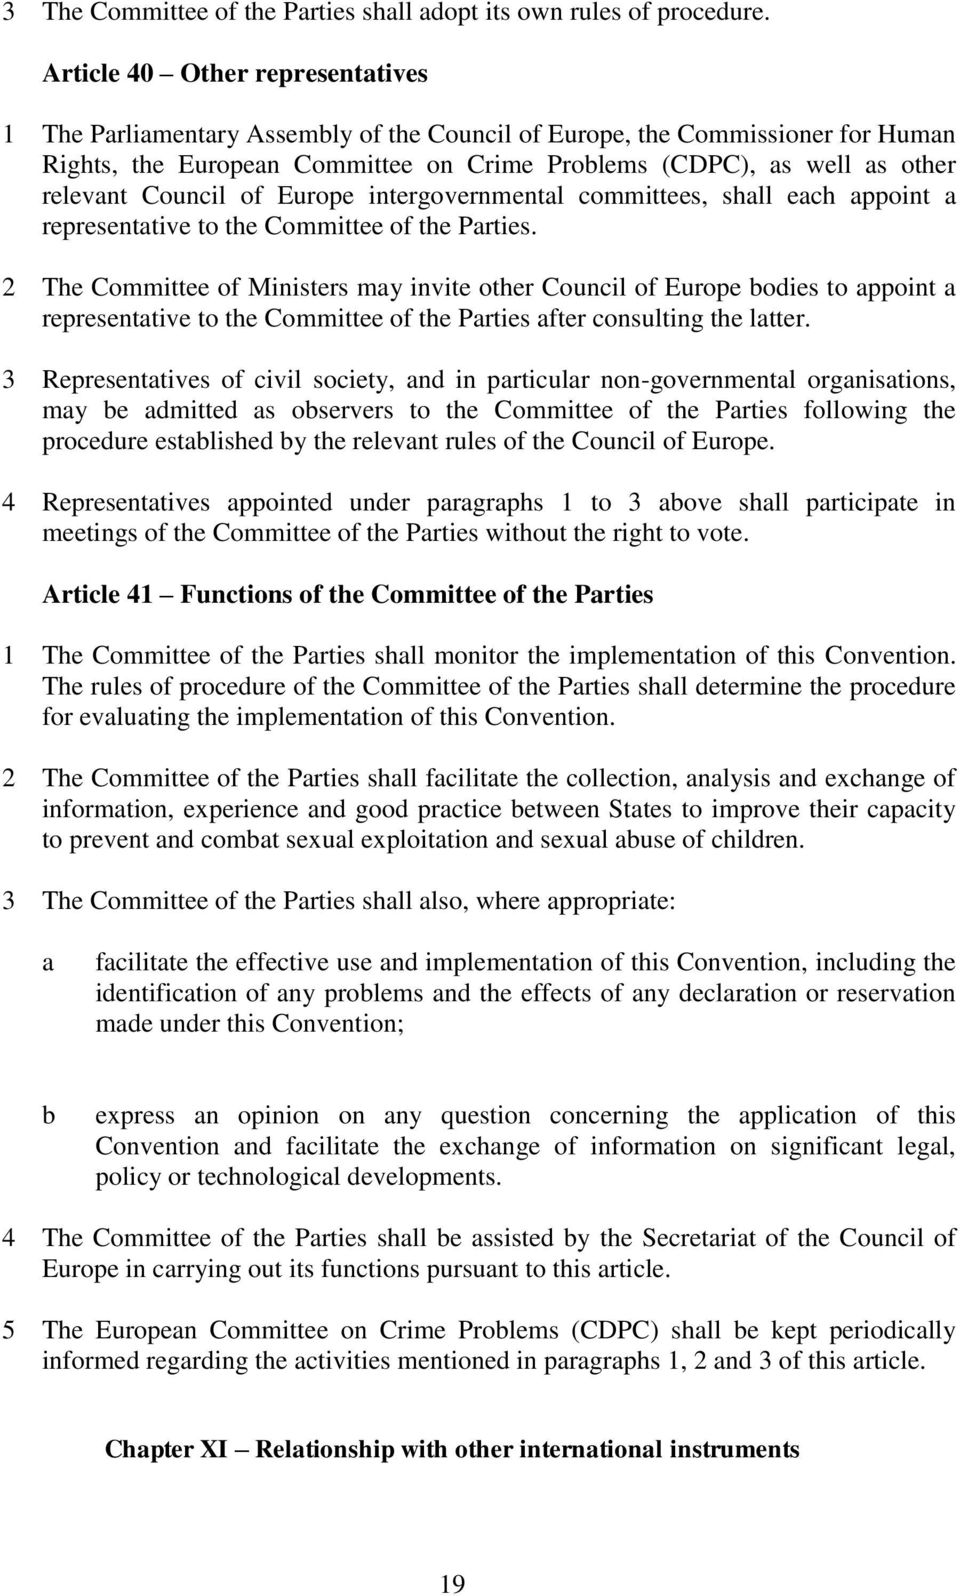 Council of Europe intergovernmental committees, shall each appoint a representative to the Committee of the Parties.